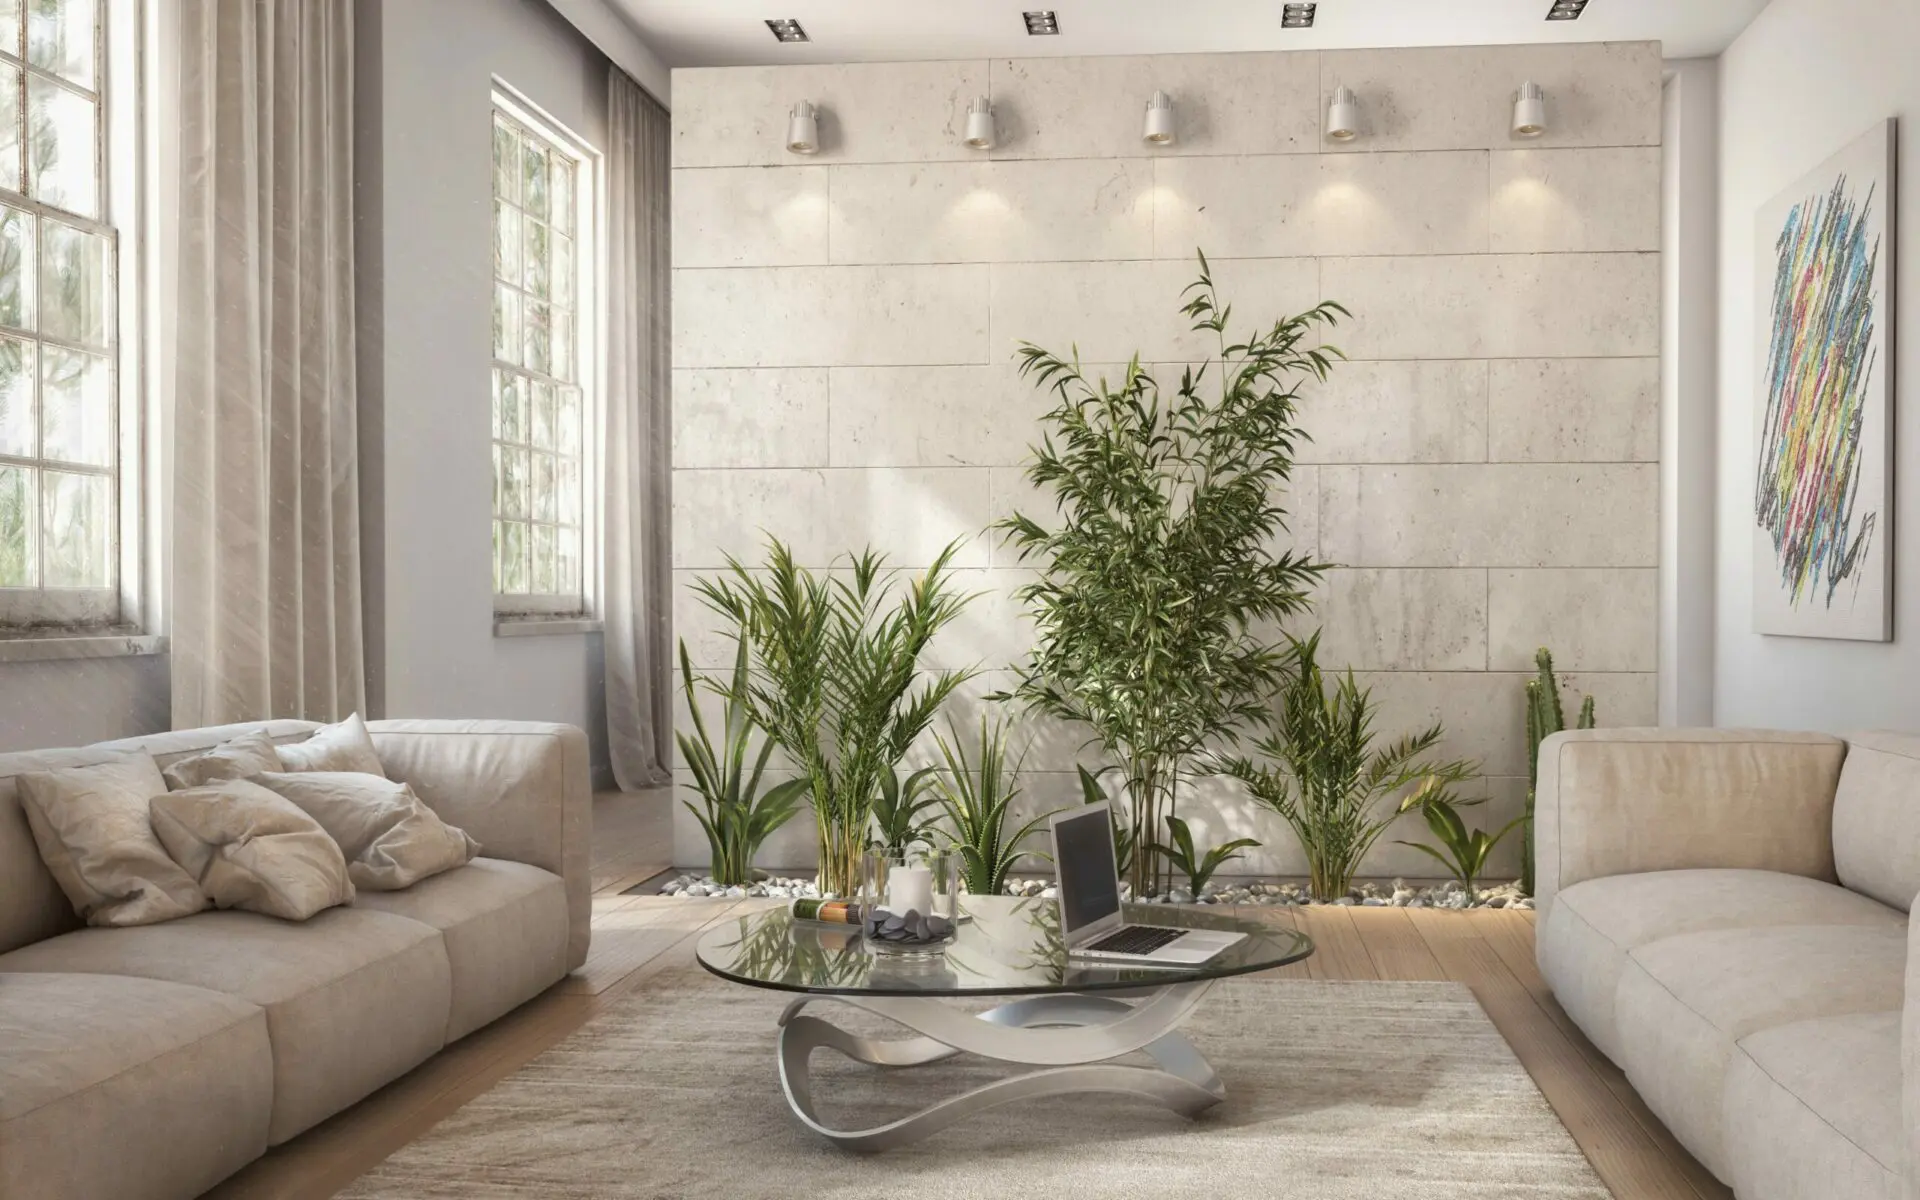 Natural interior design ideas for your property 